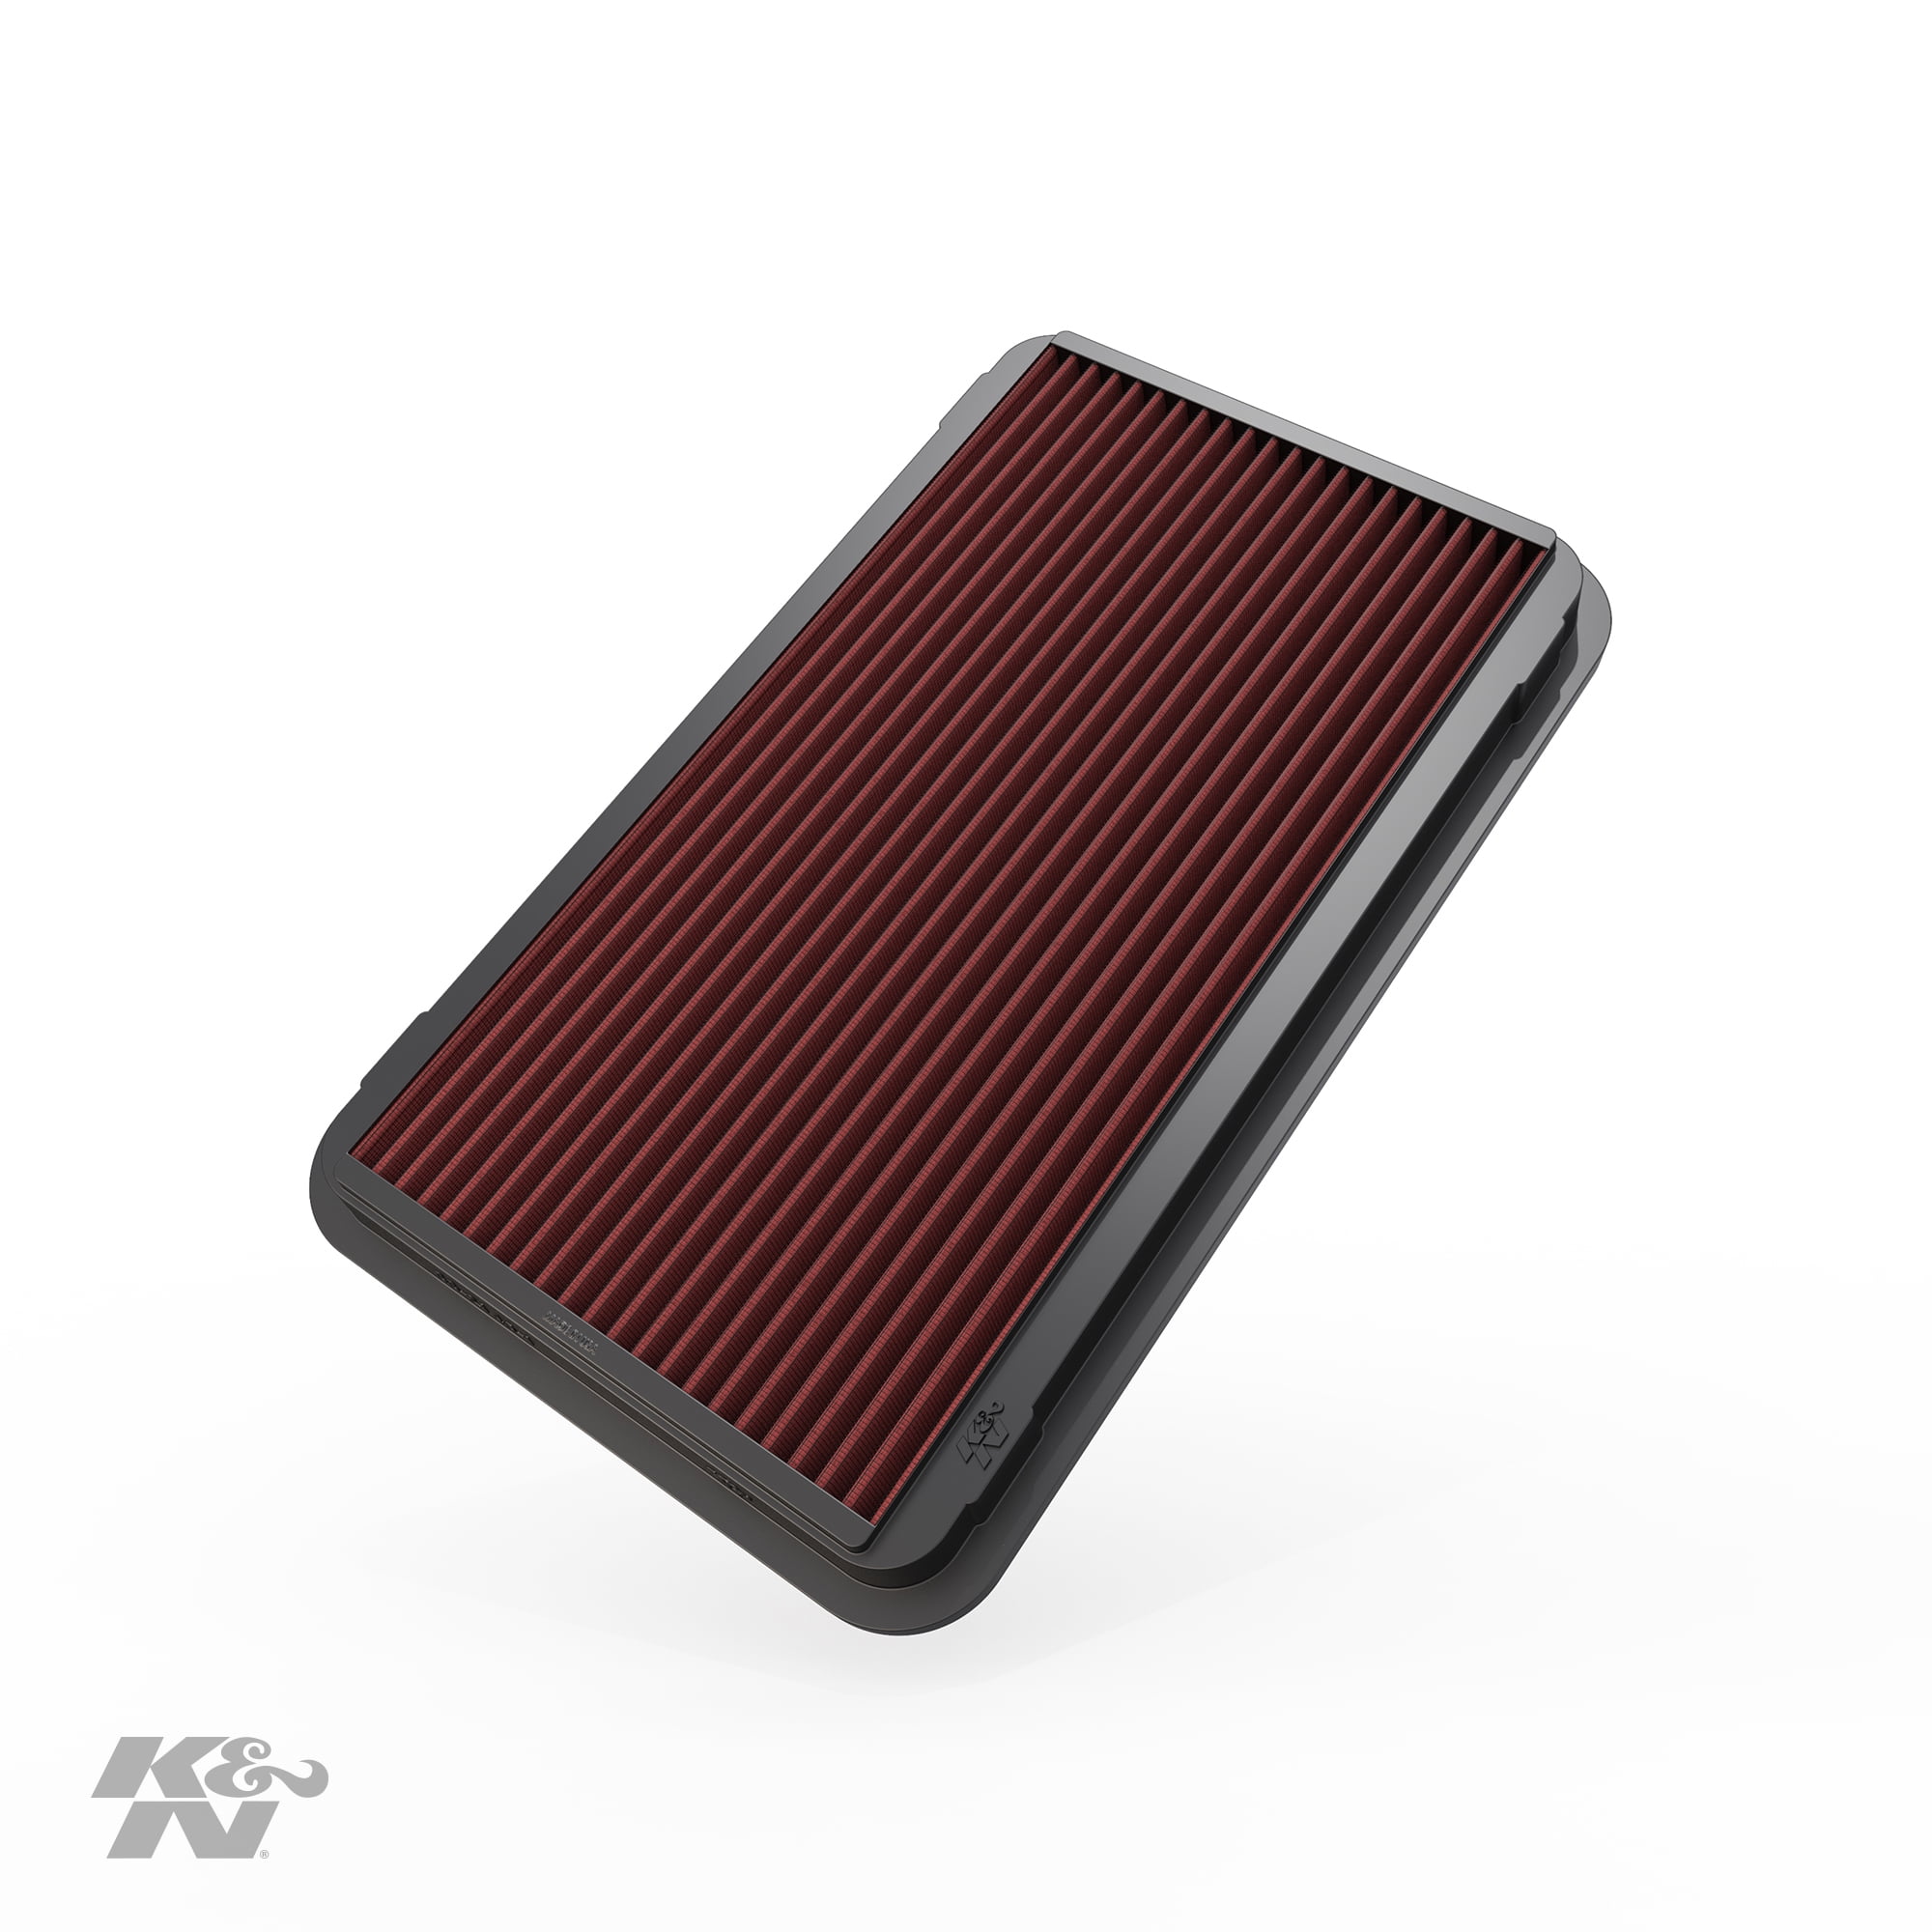 K&N E-1997 High Performance Replacement Air Filter 